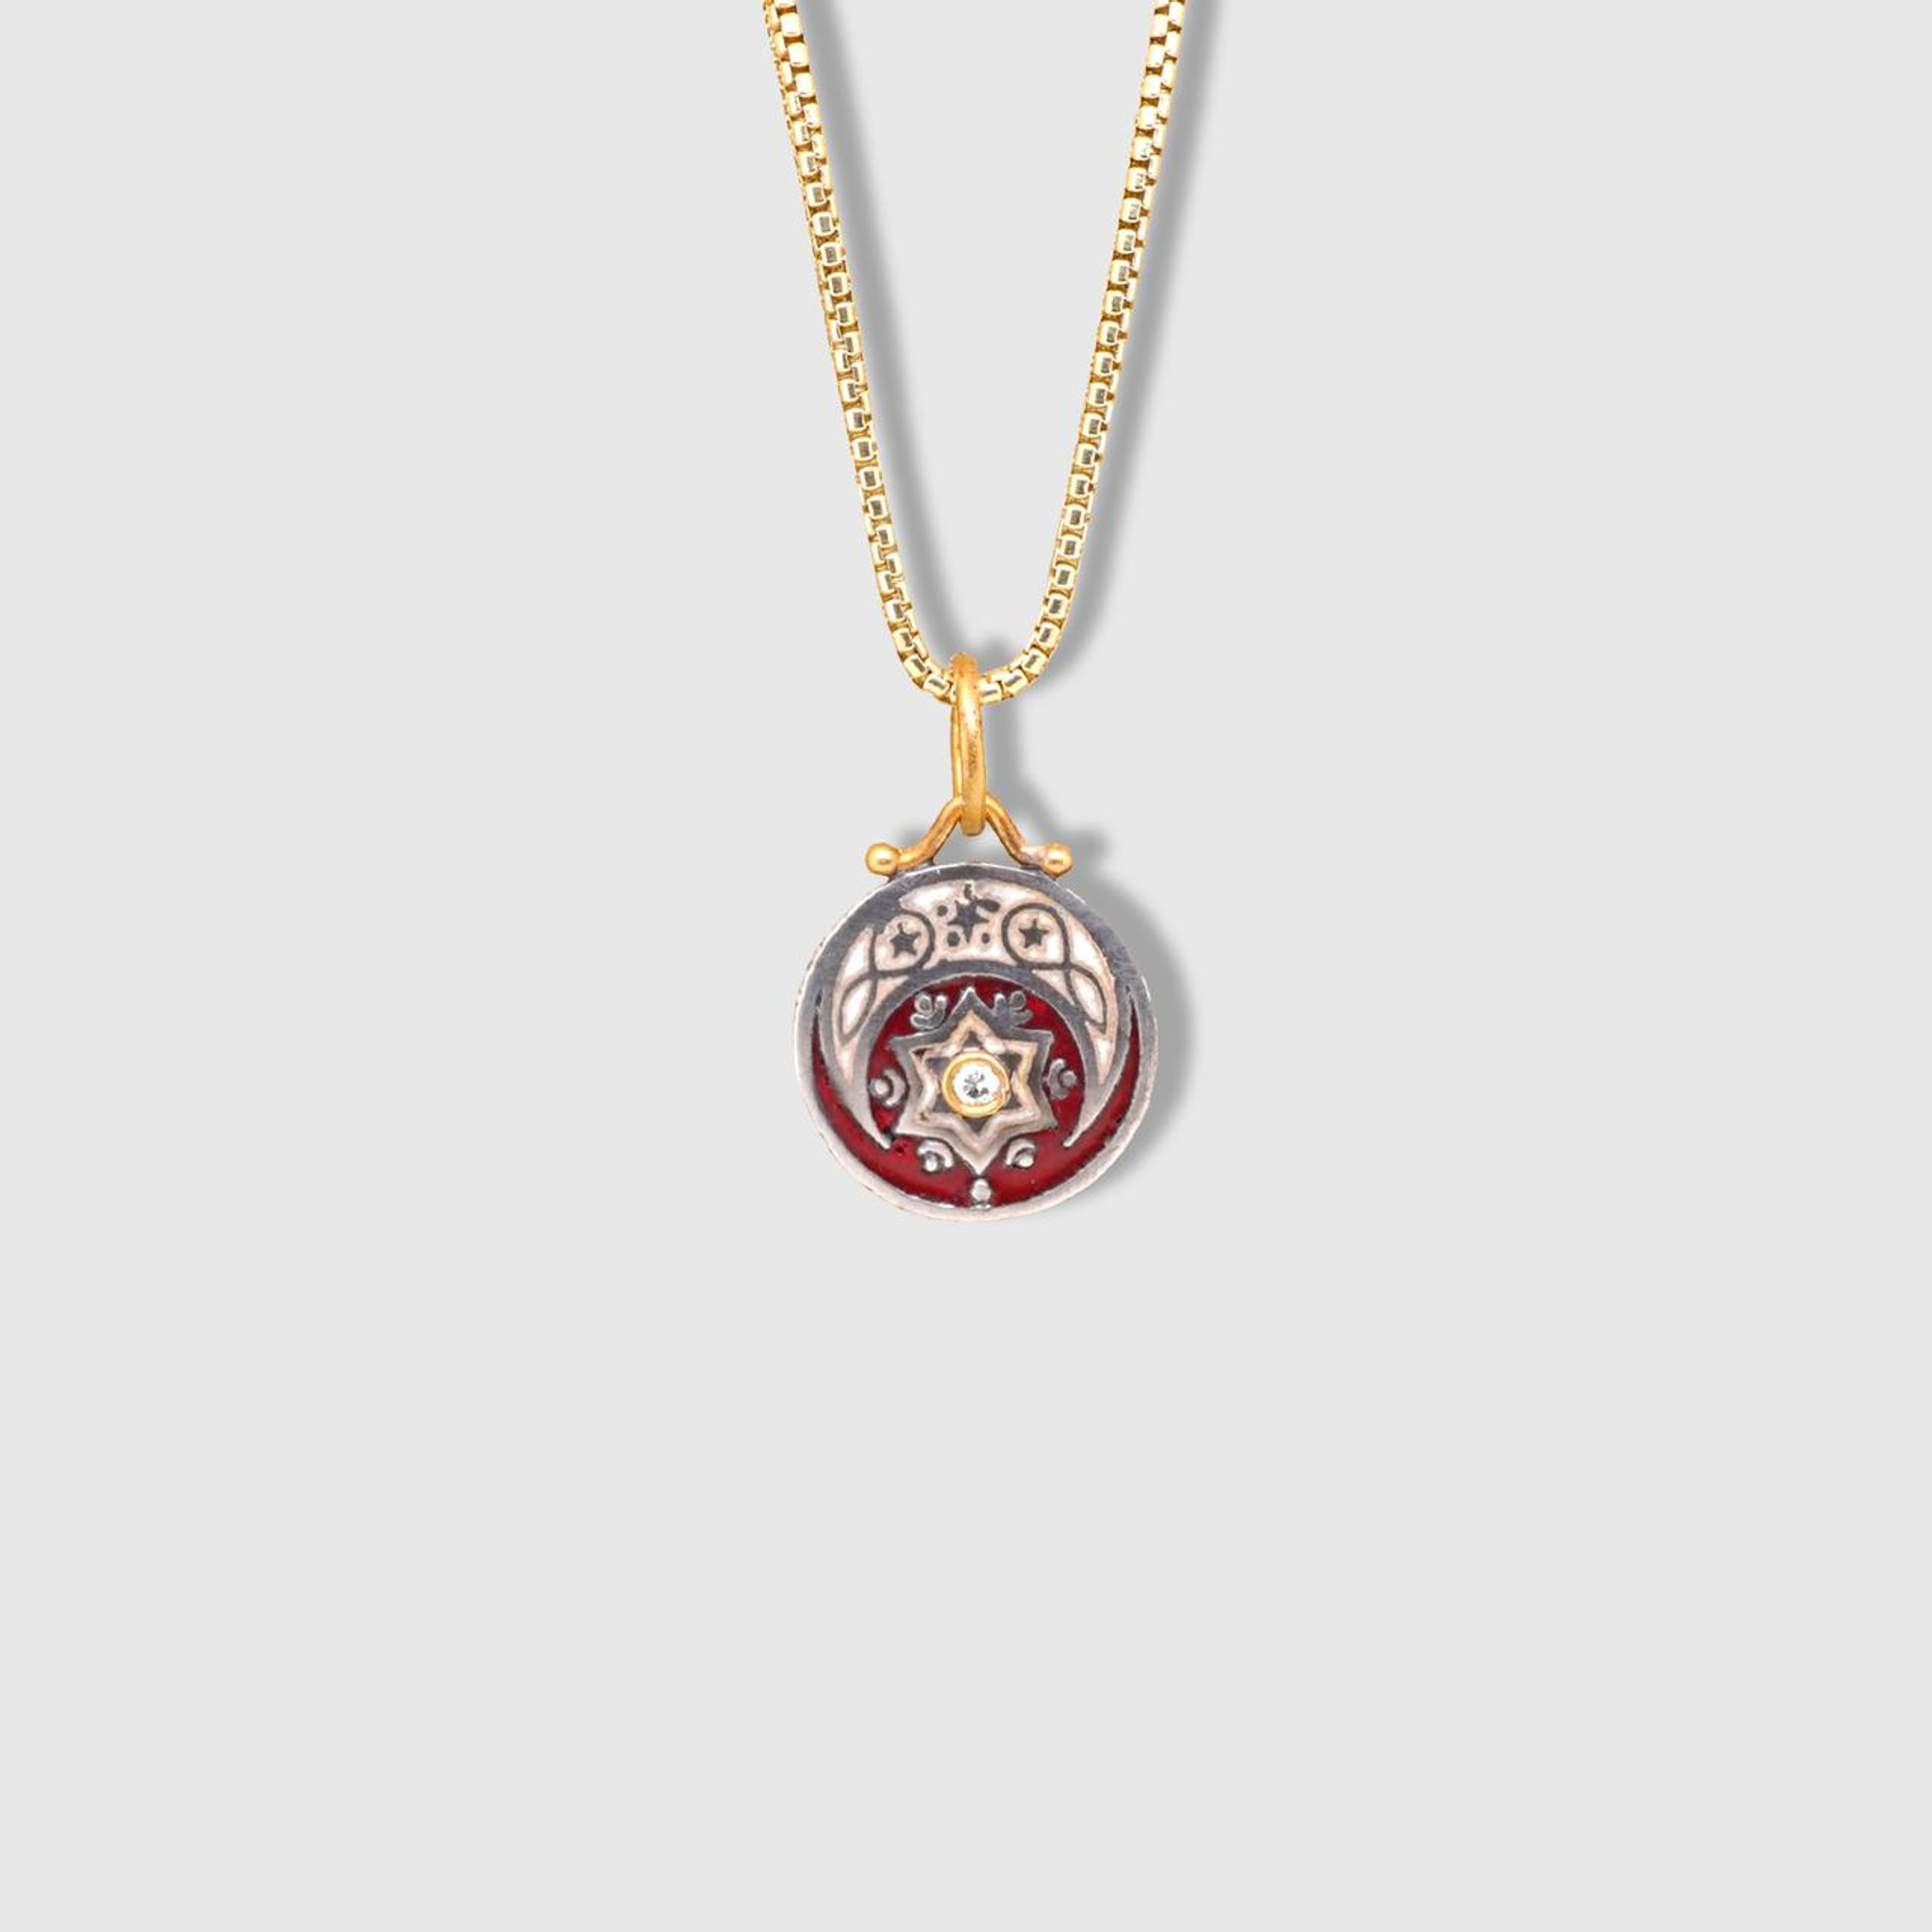 Prehistoric Works Moon and Star Enameled Pendant Charm with Diamond, 24kt Gold and Silver 